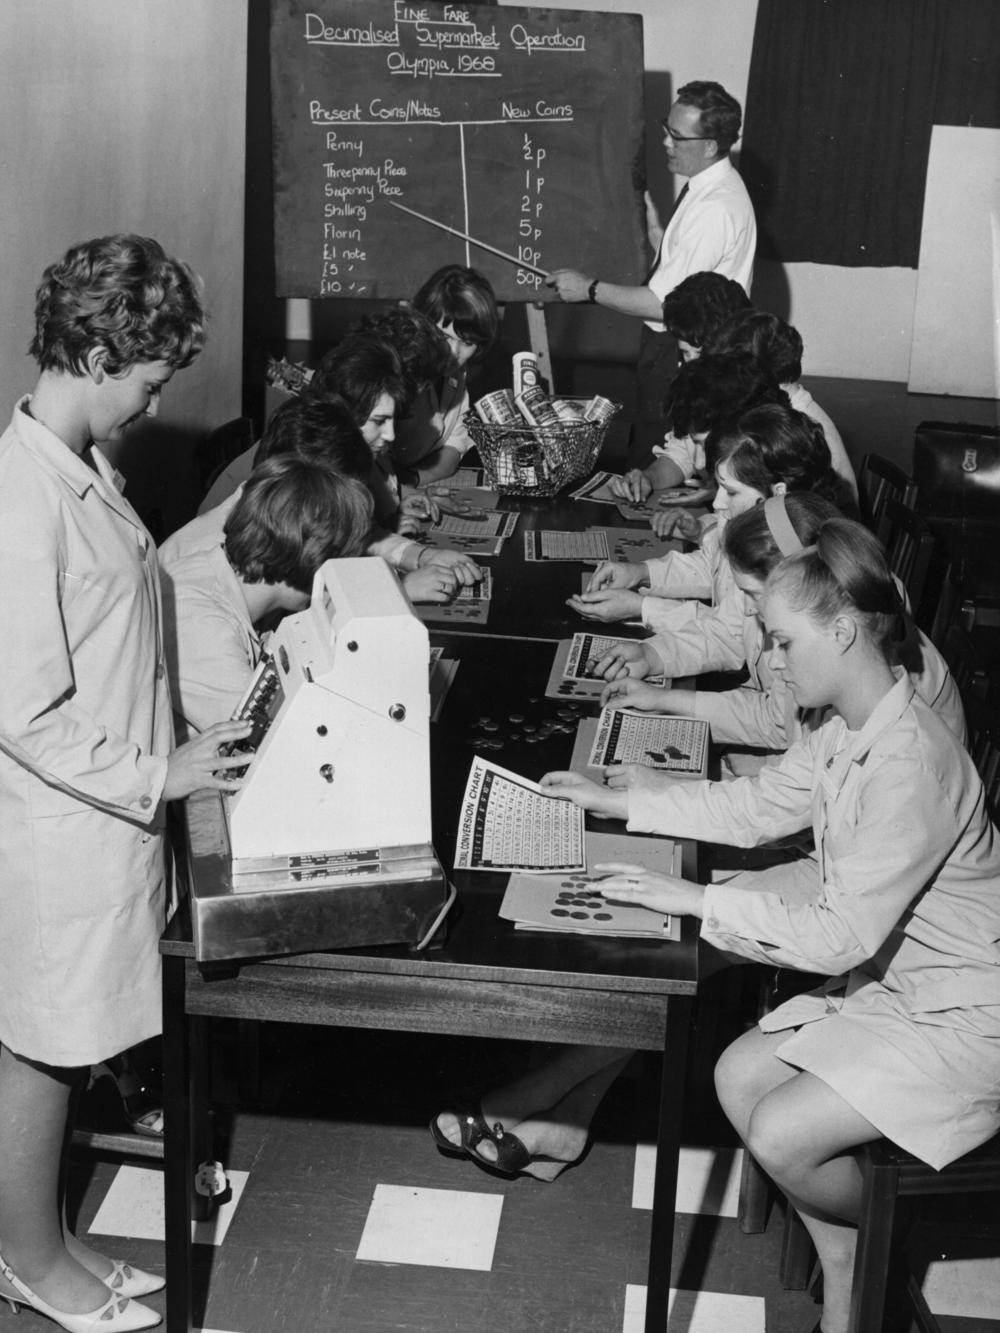 Checkout workers at a Fine Fare supermarket studying decimal conversion charts during a training course in 1968.